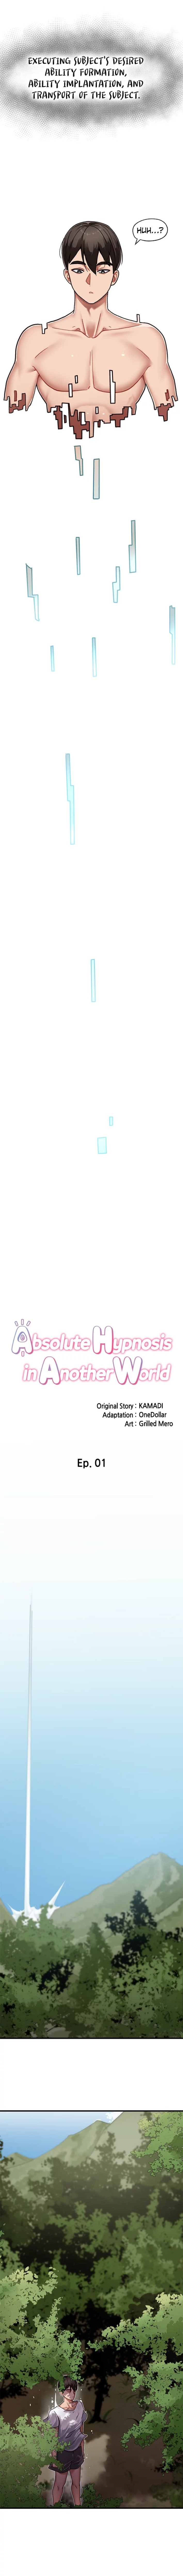 absolute-hypnosis-in-another-world-chap-1-5